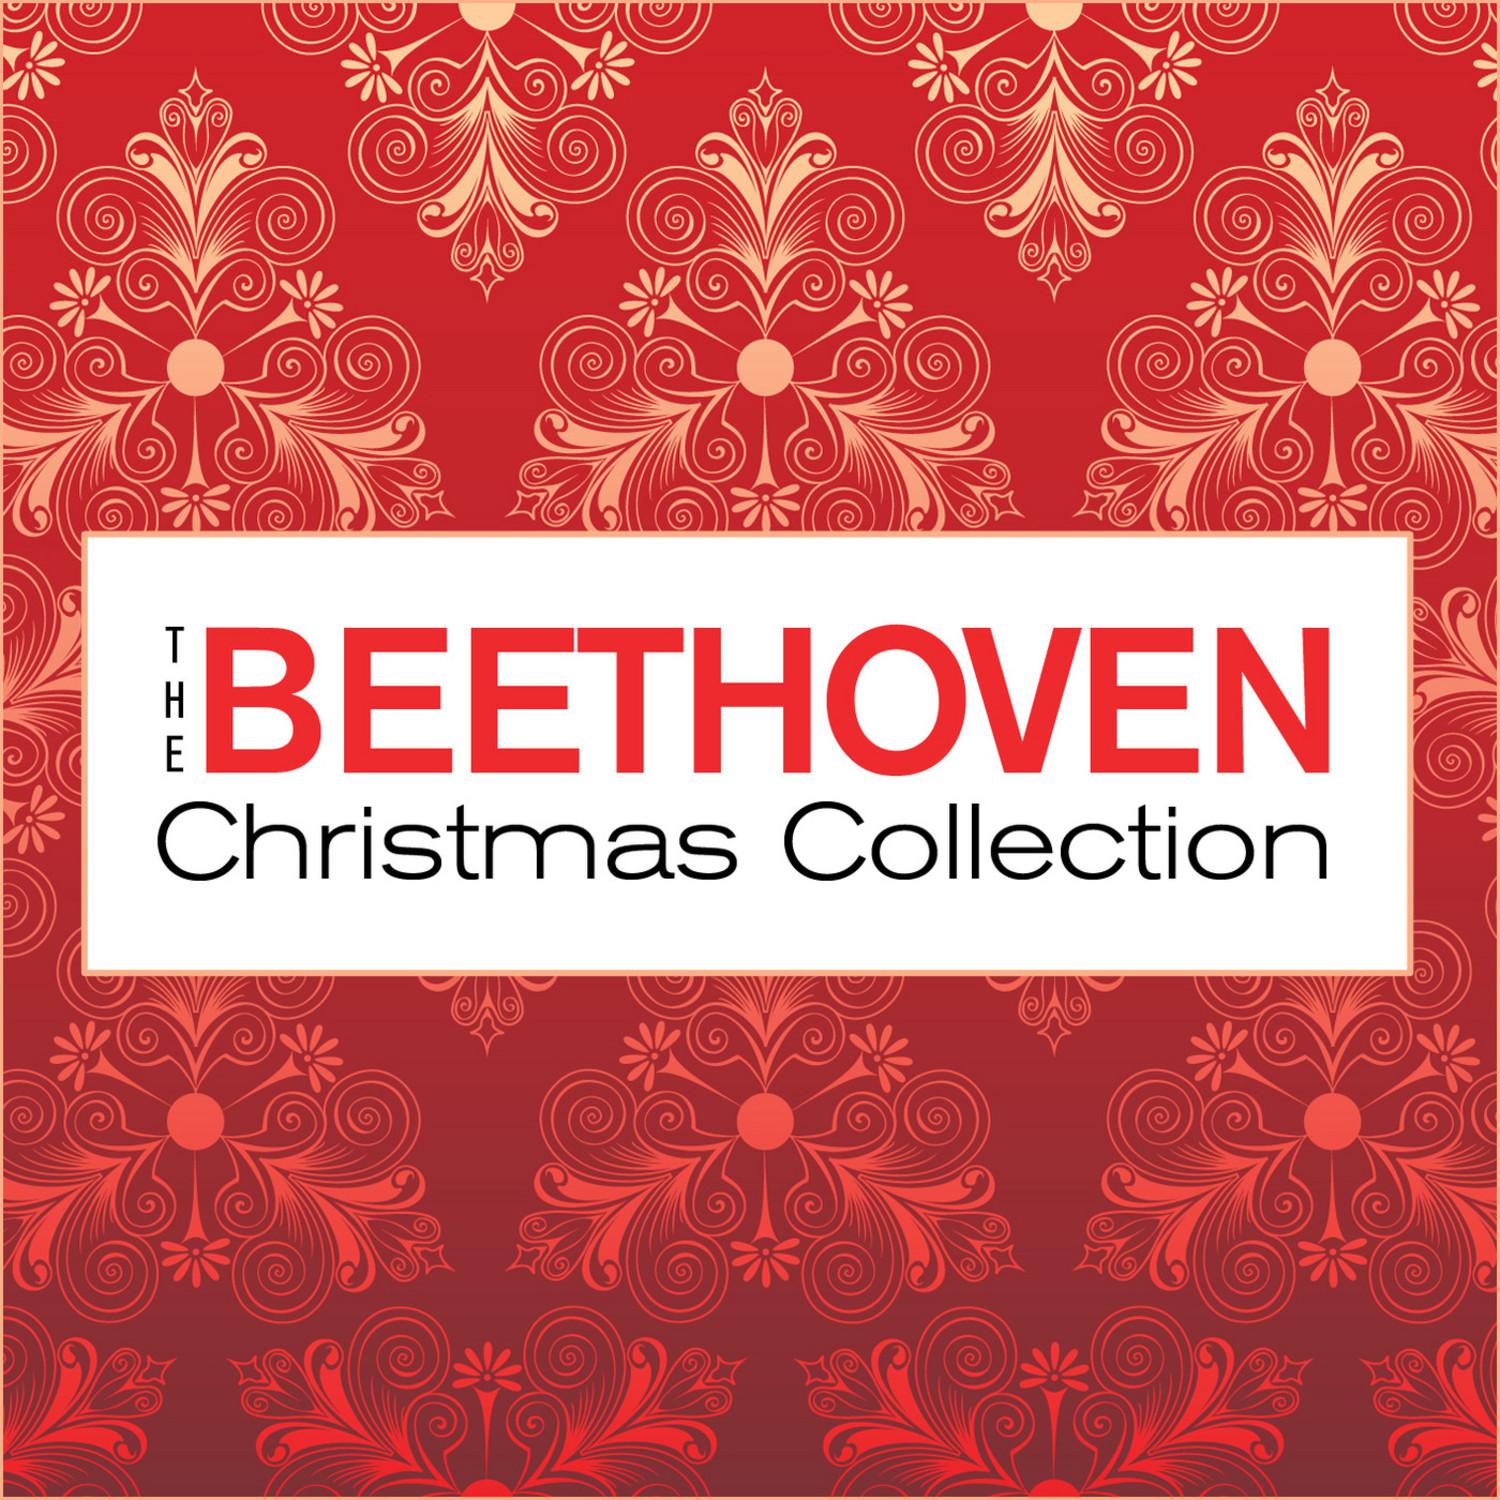 The Beethoven Christmas Collection